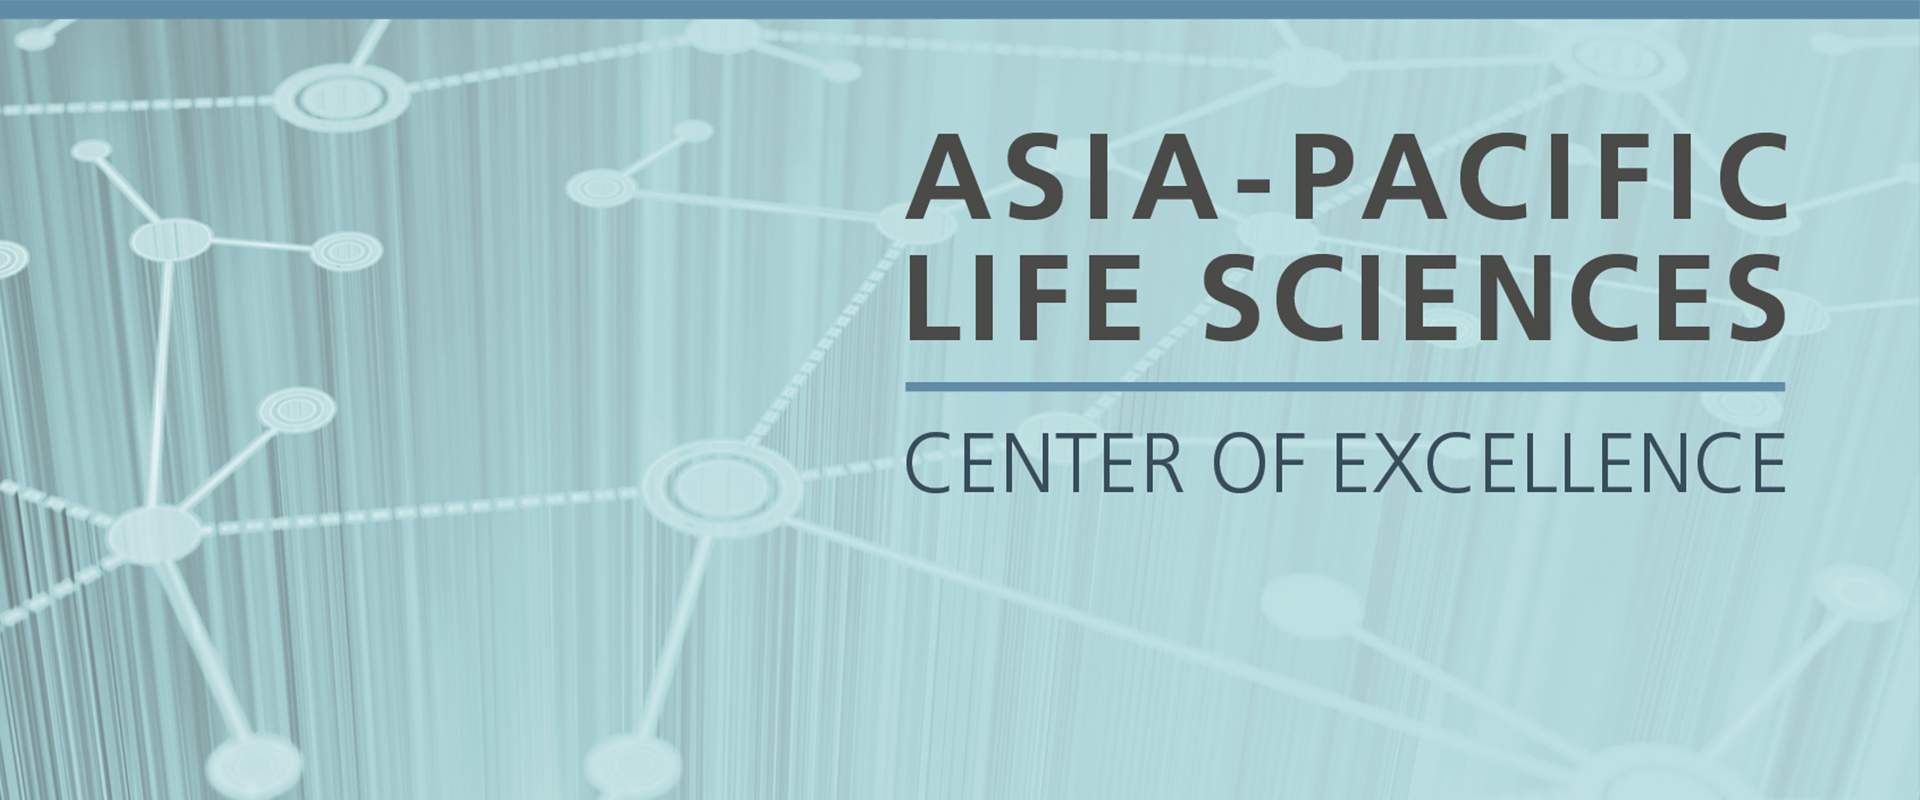 APAC Life Sciences Centre of Excellence